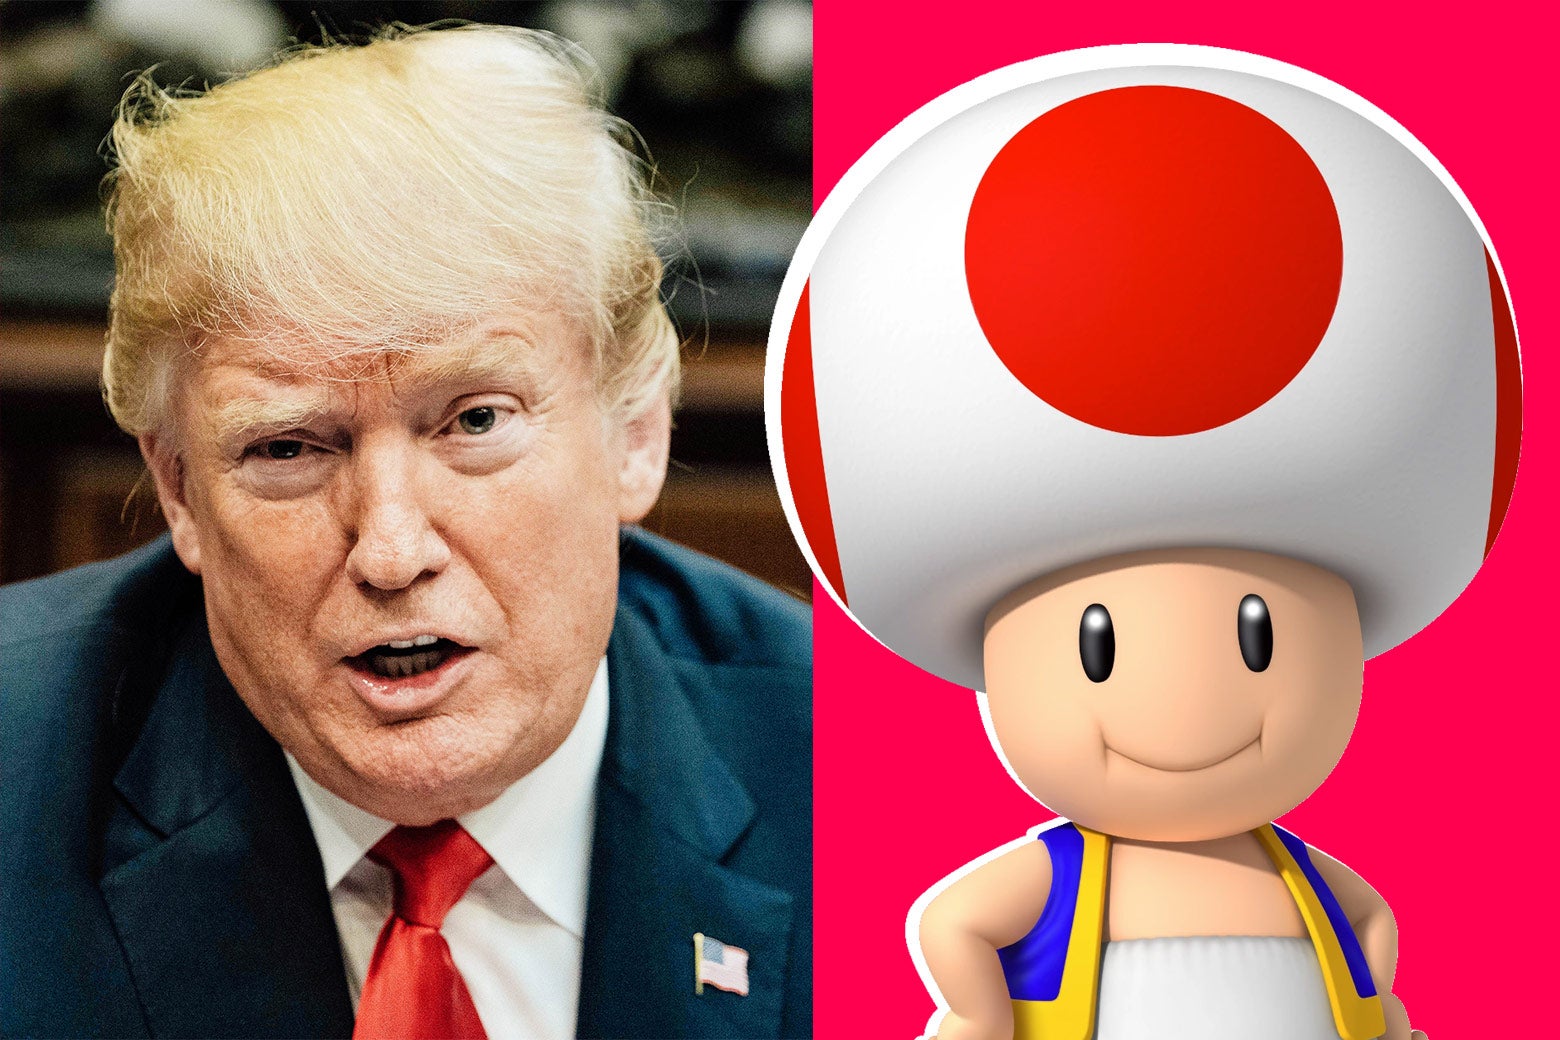 On the left, Trump's face; on the right, Toad from Mario Kart.